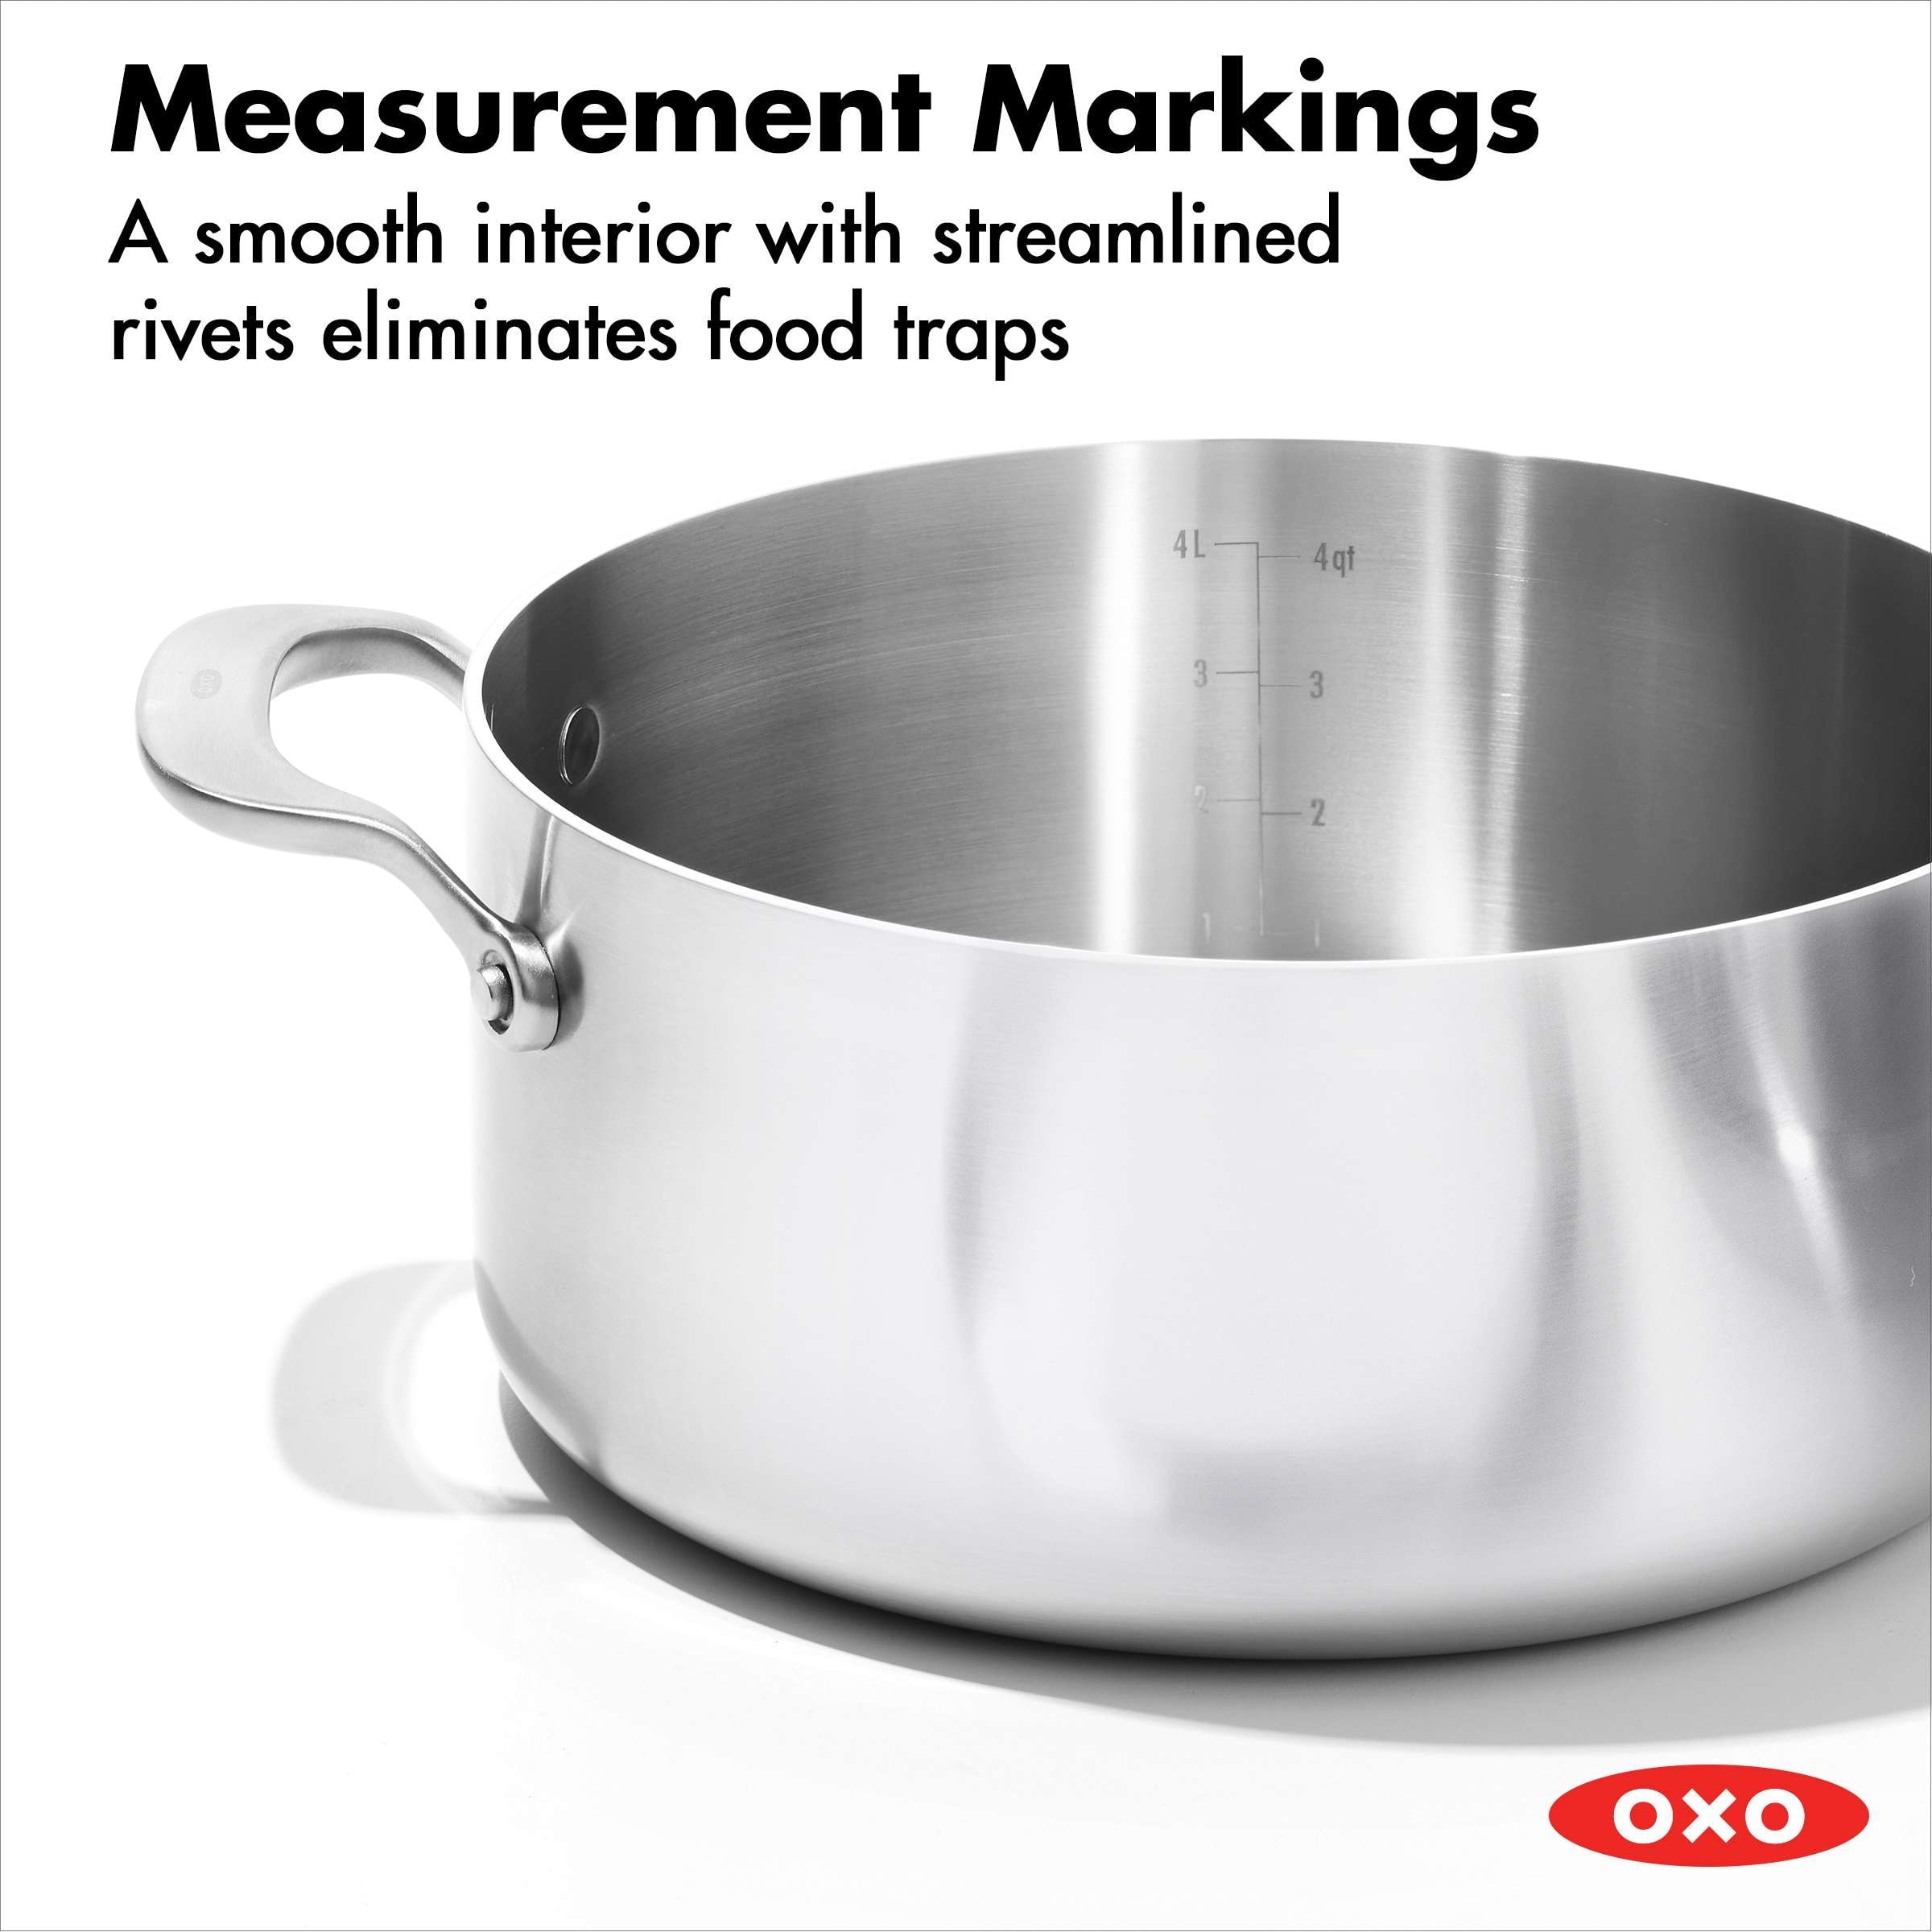 https://ak1.ostkcdn.com/images/products/is/images/direct/515b69c311e9f59b0a5b64dfd4851025fa416719/OXO-Mira-3-Ply-Stainless-Steel-Cookware-Pots-and-Pans-Set%2C-10-Piece.jpg